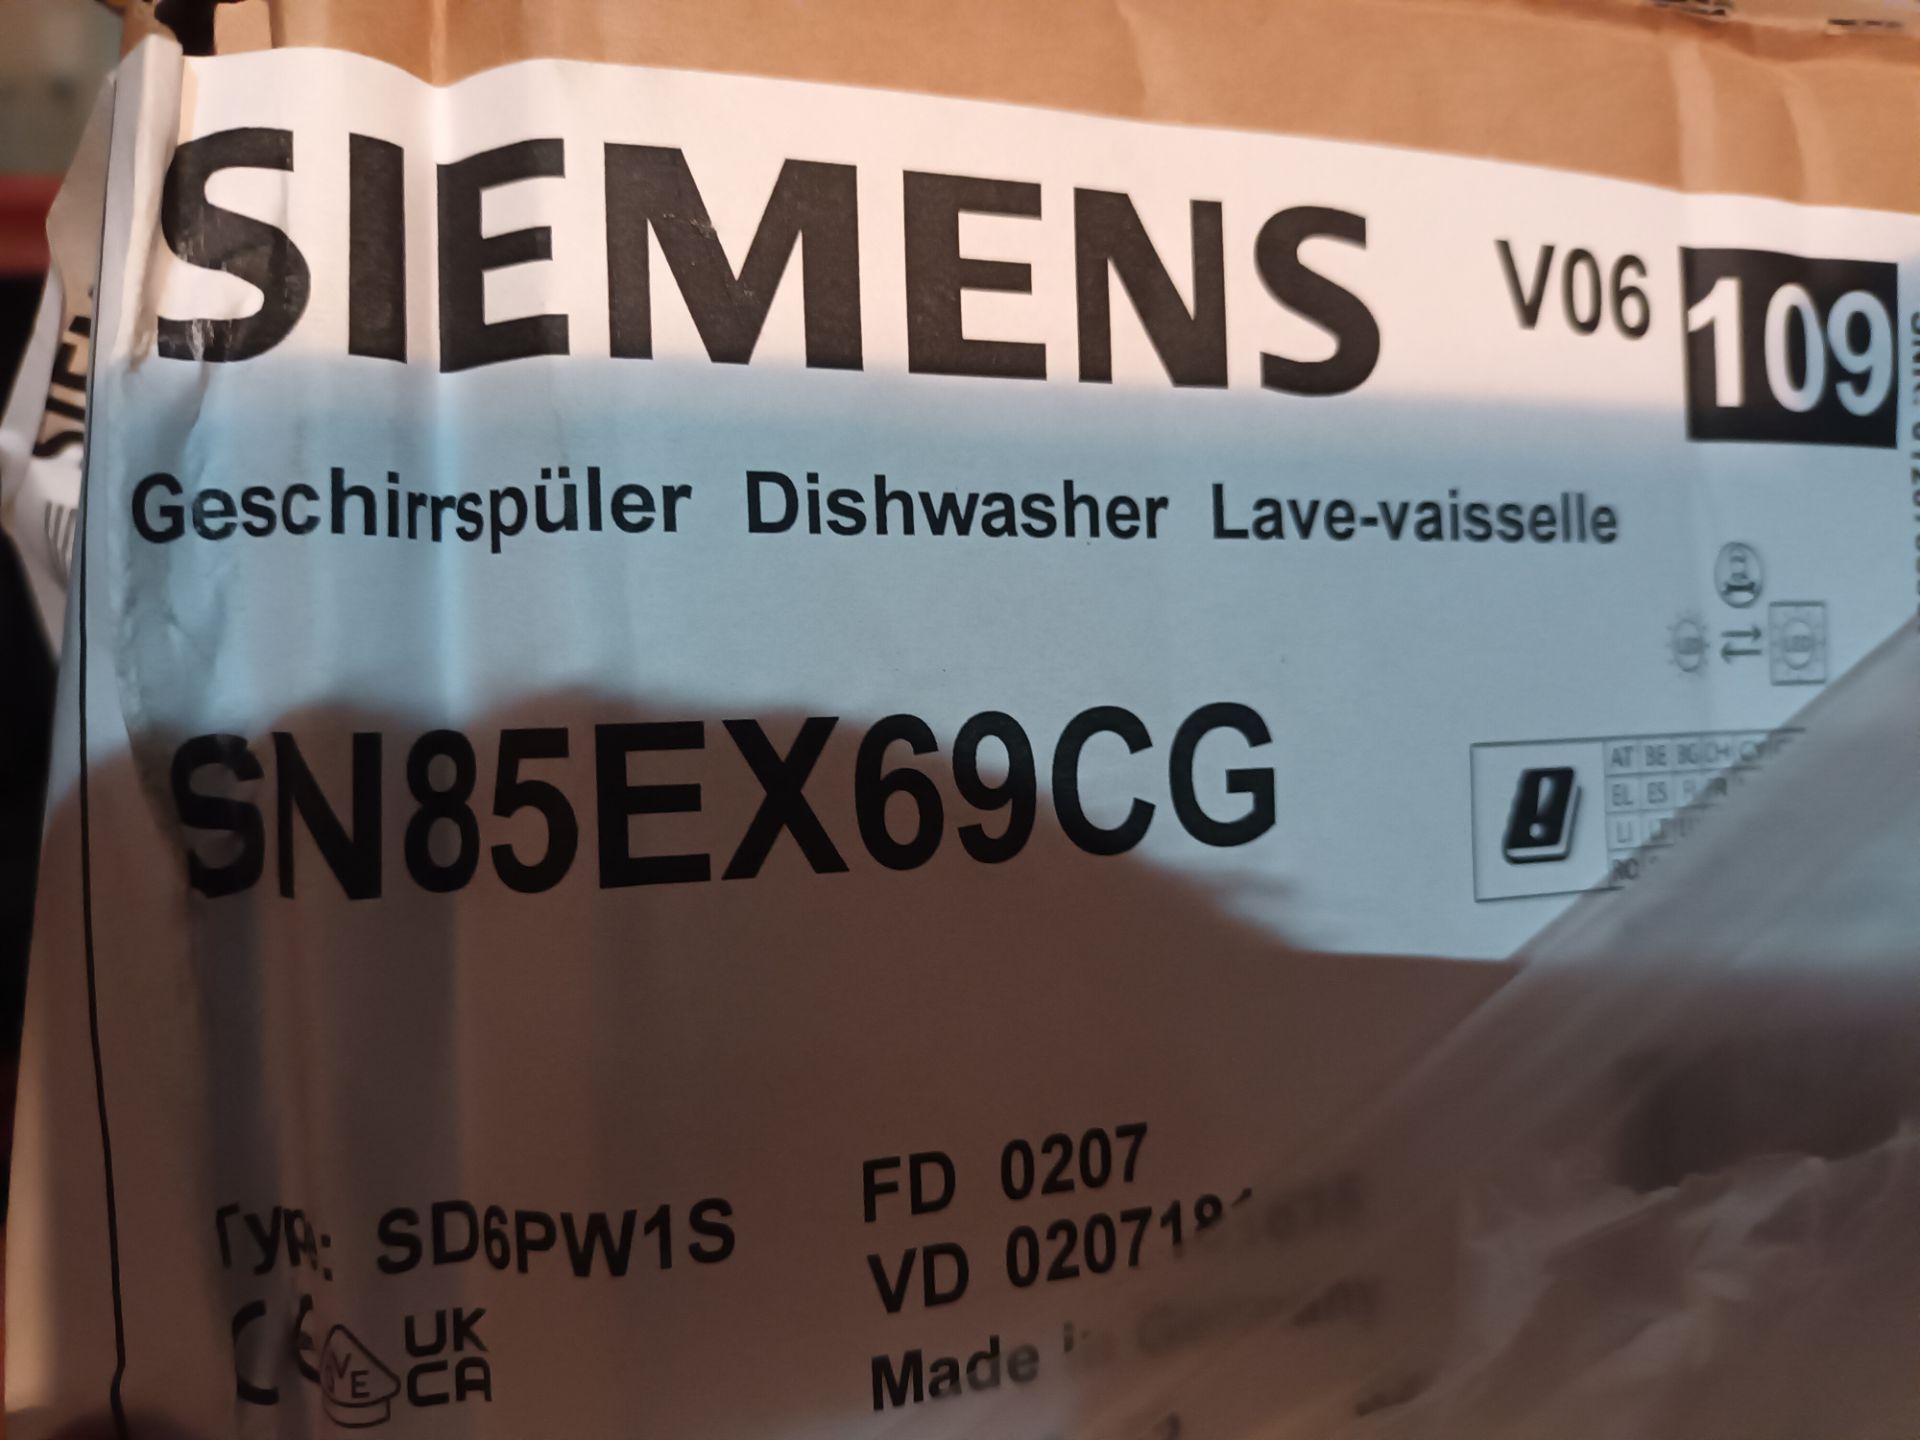 Siemens SN85EX69CG Type SD6PW1S dishwasher (boxed & sealed) (Located: Billericay) - Image 2 of 2